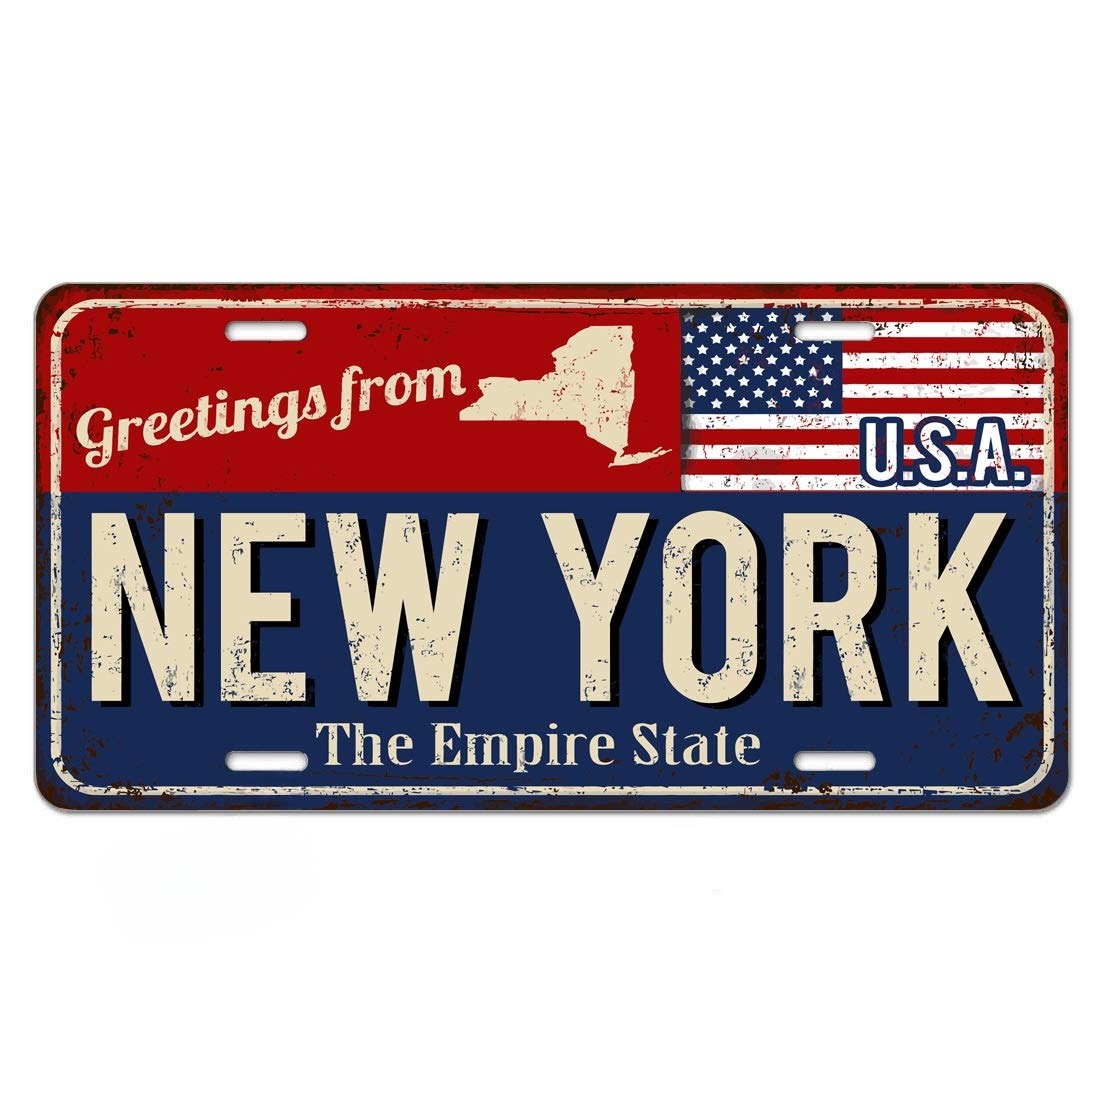 

Greetings From New York Vintage Rusty Metal Sign With American Flag Car Front License Plate, Vanity Tag, Aluminum Novelty License Plate, 6x12inch